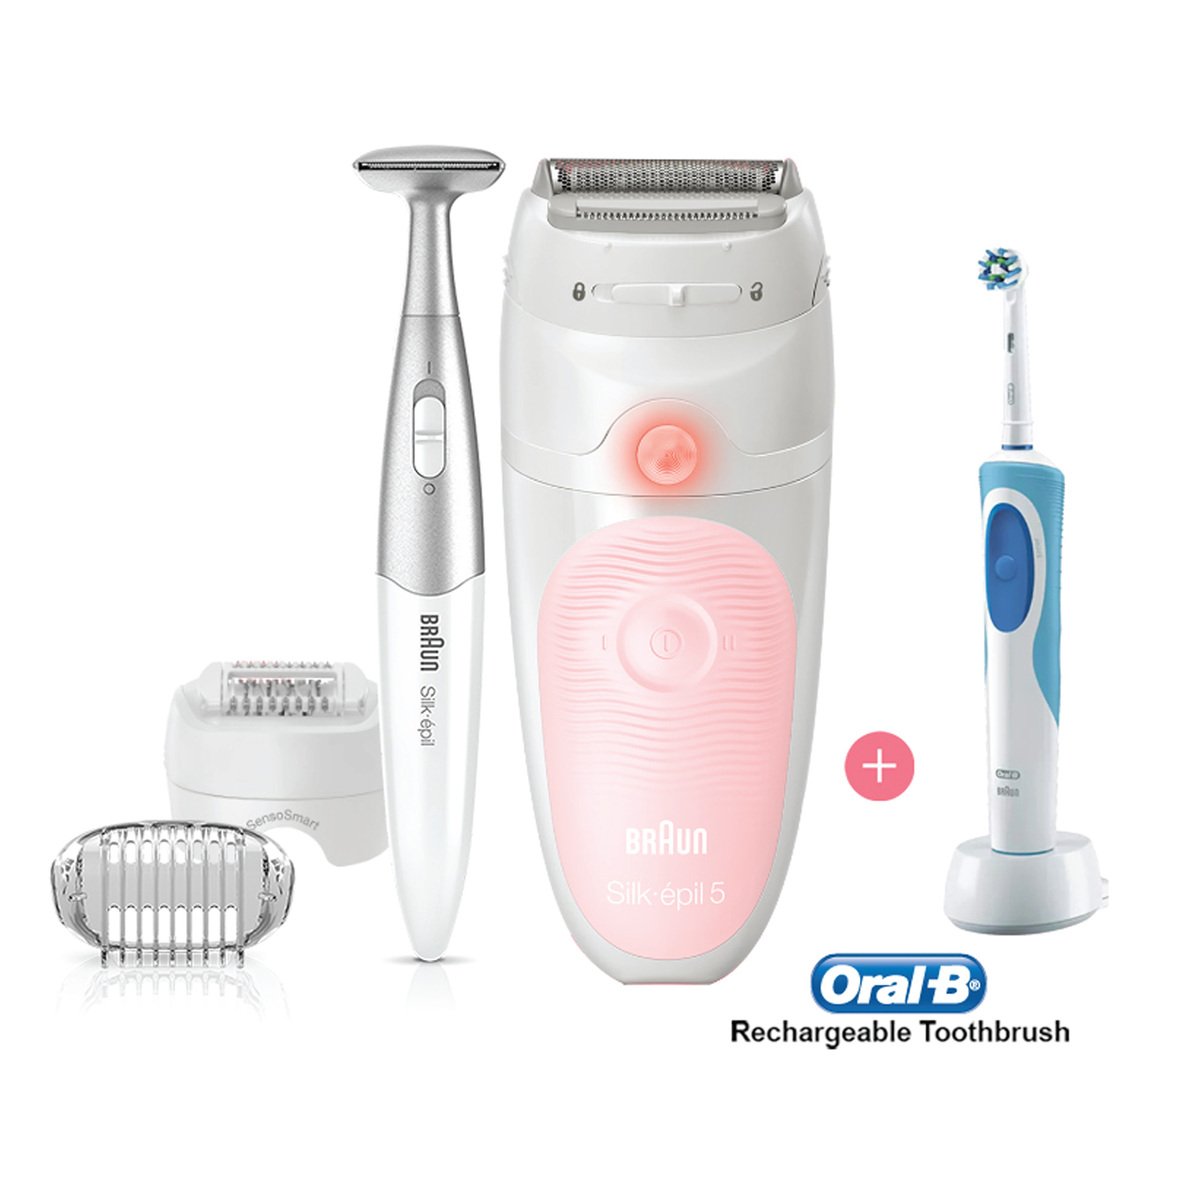 Braun Silk-épil 5 SES-5820 Wet & Dry epilator with 3 extras incl bikini styler + Oral-B Rechargeable Toothbrush D12